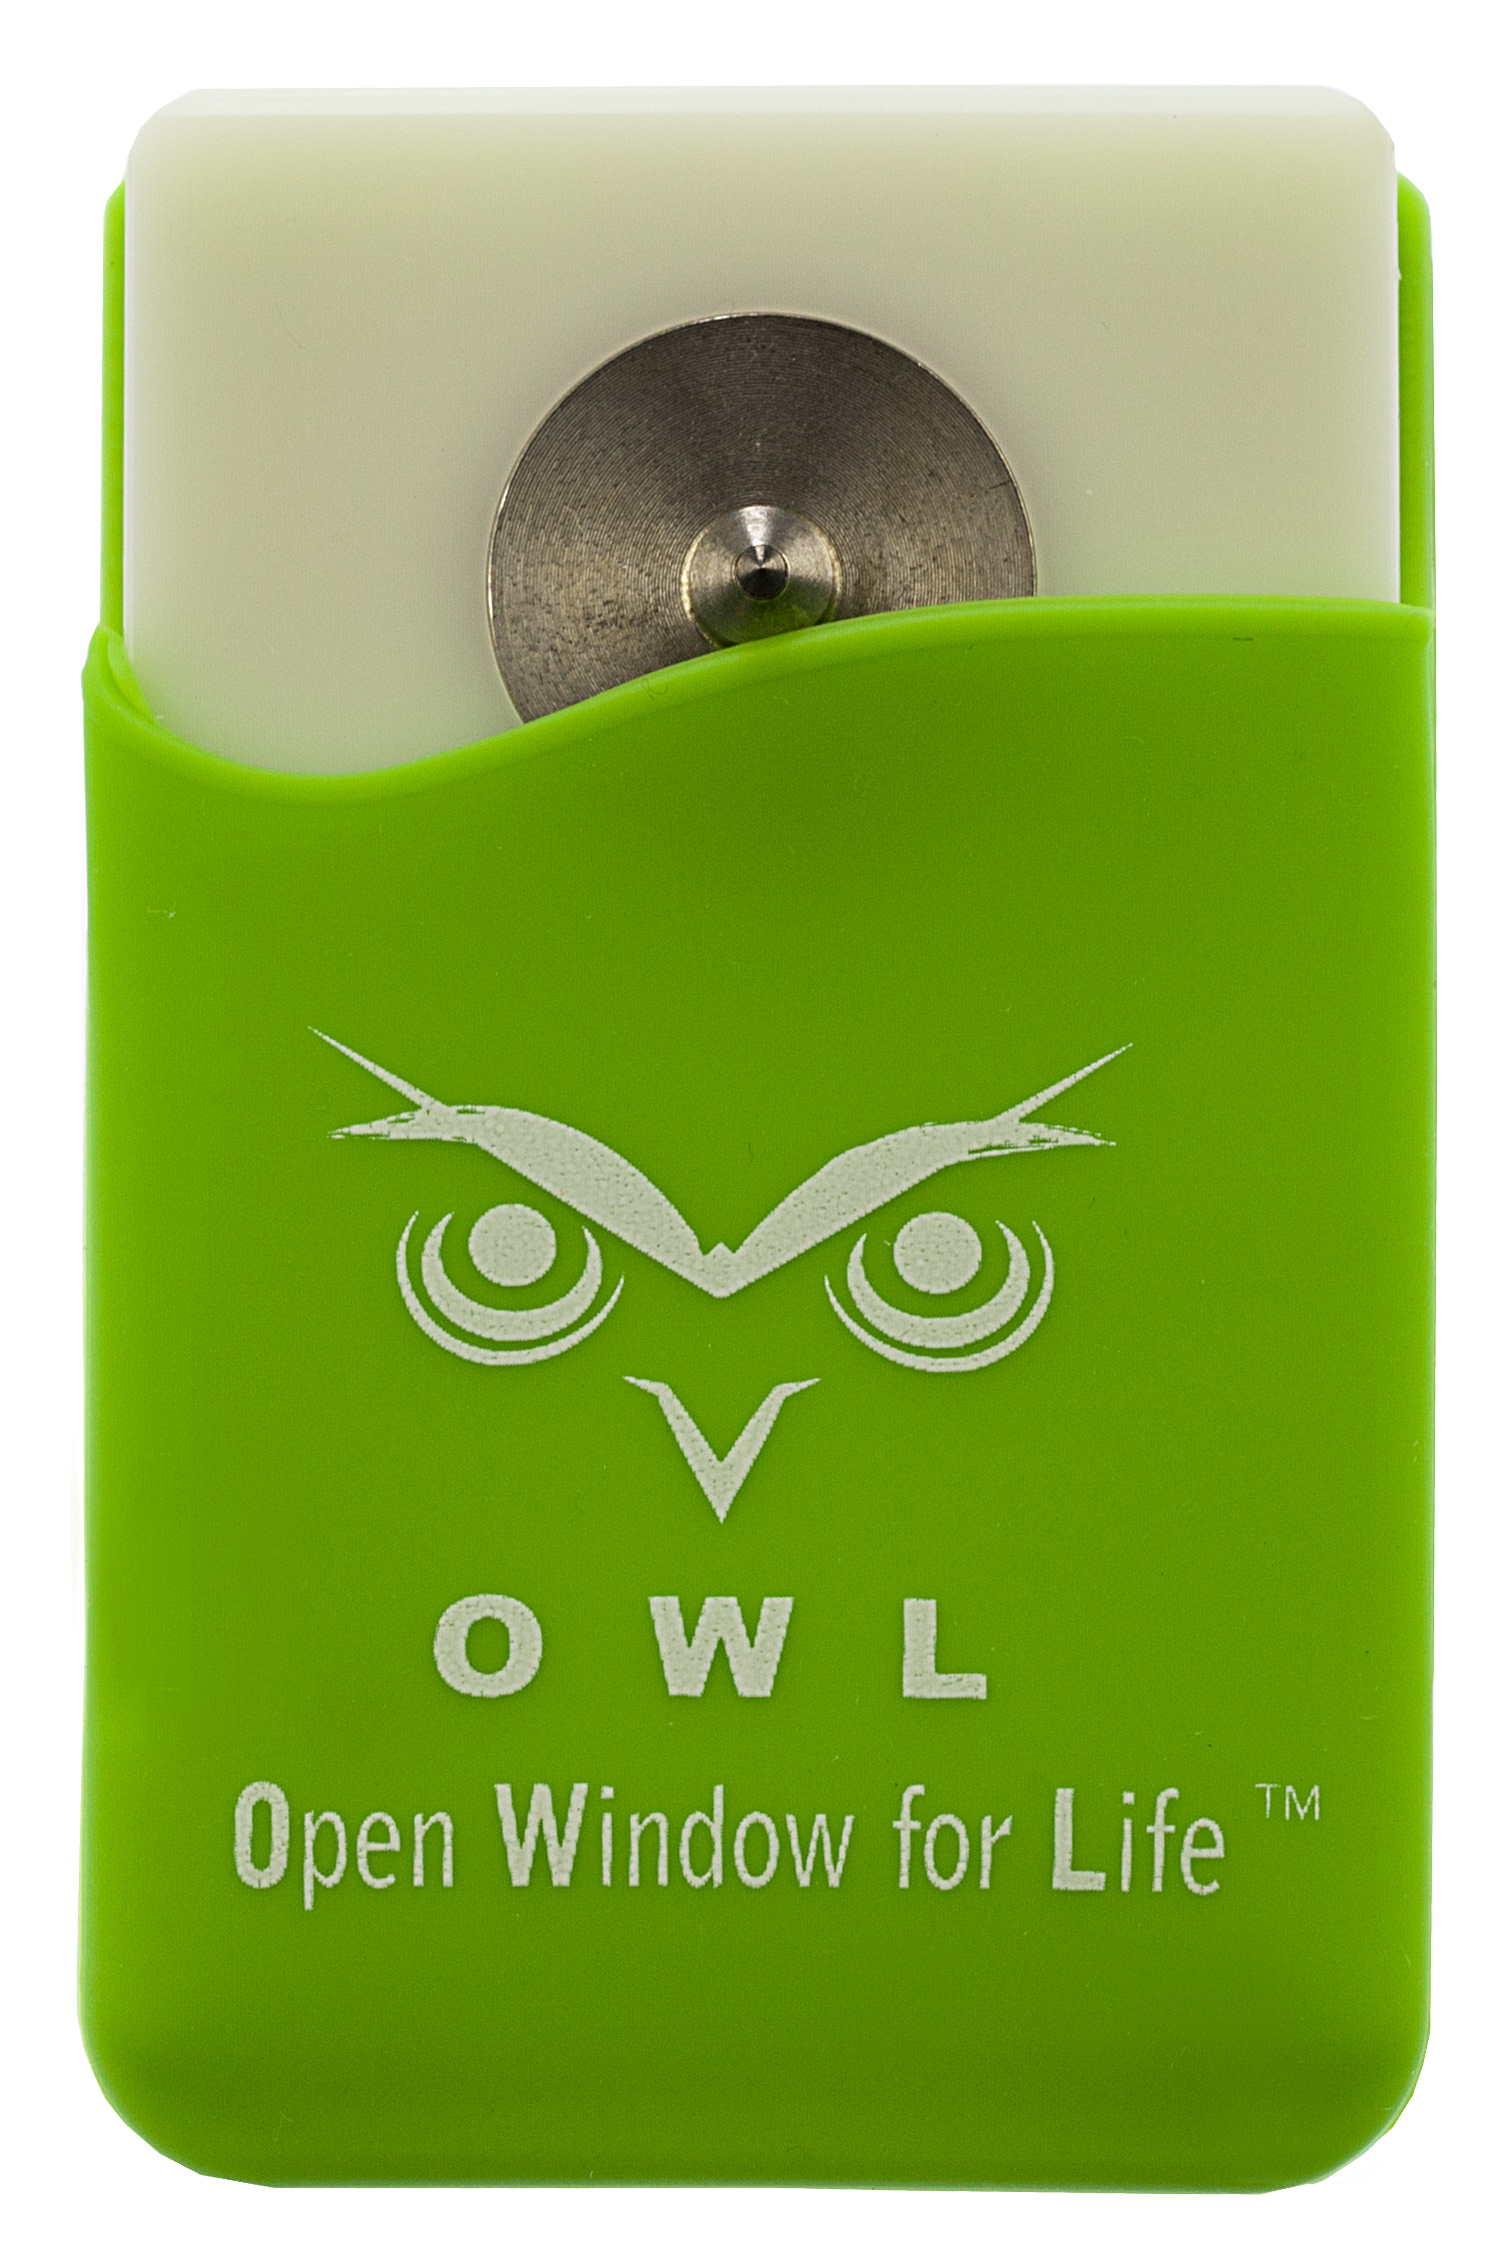 Osg1 Open Window For Life Auto Escape Tool - Green